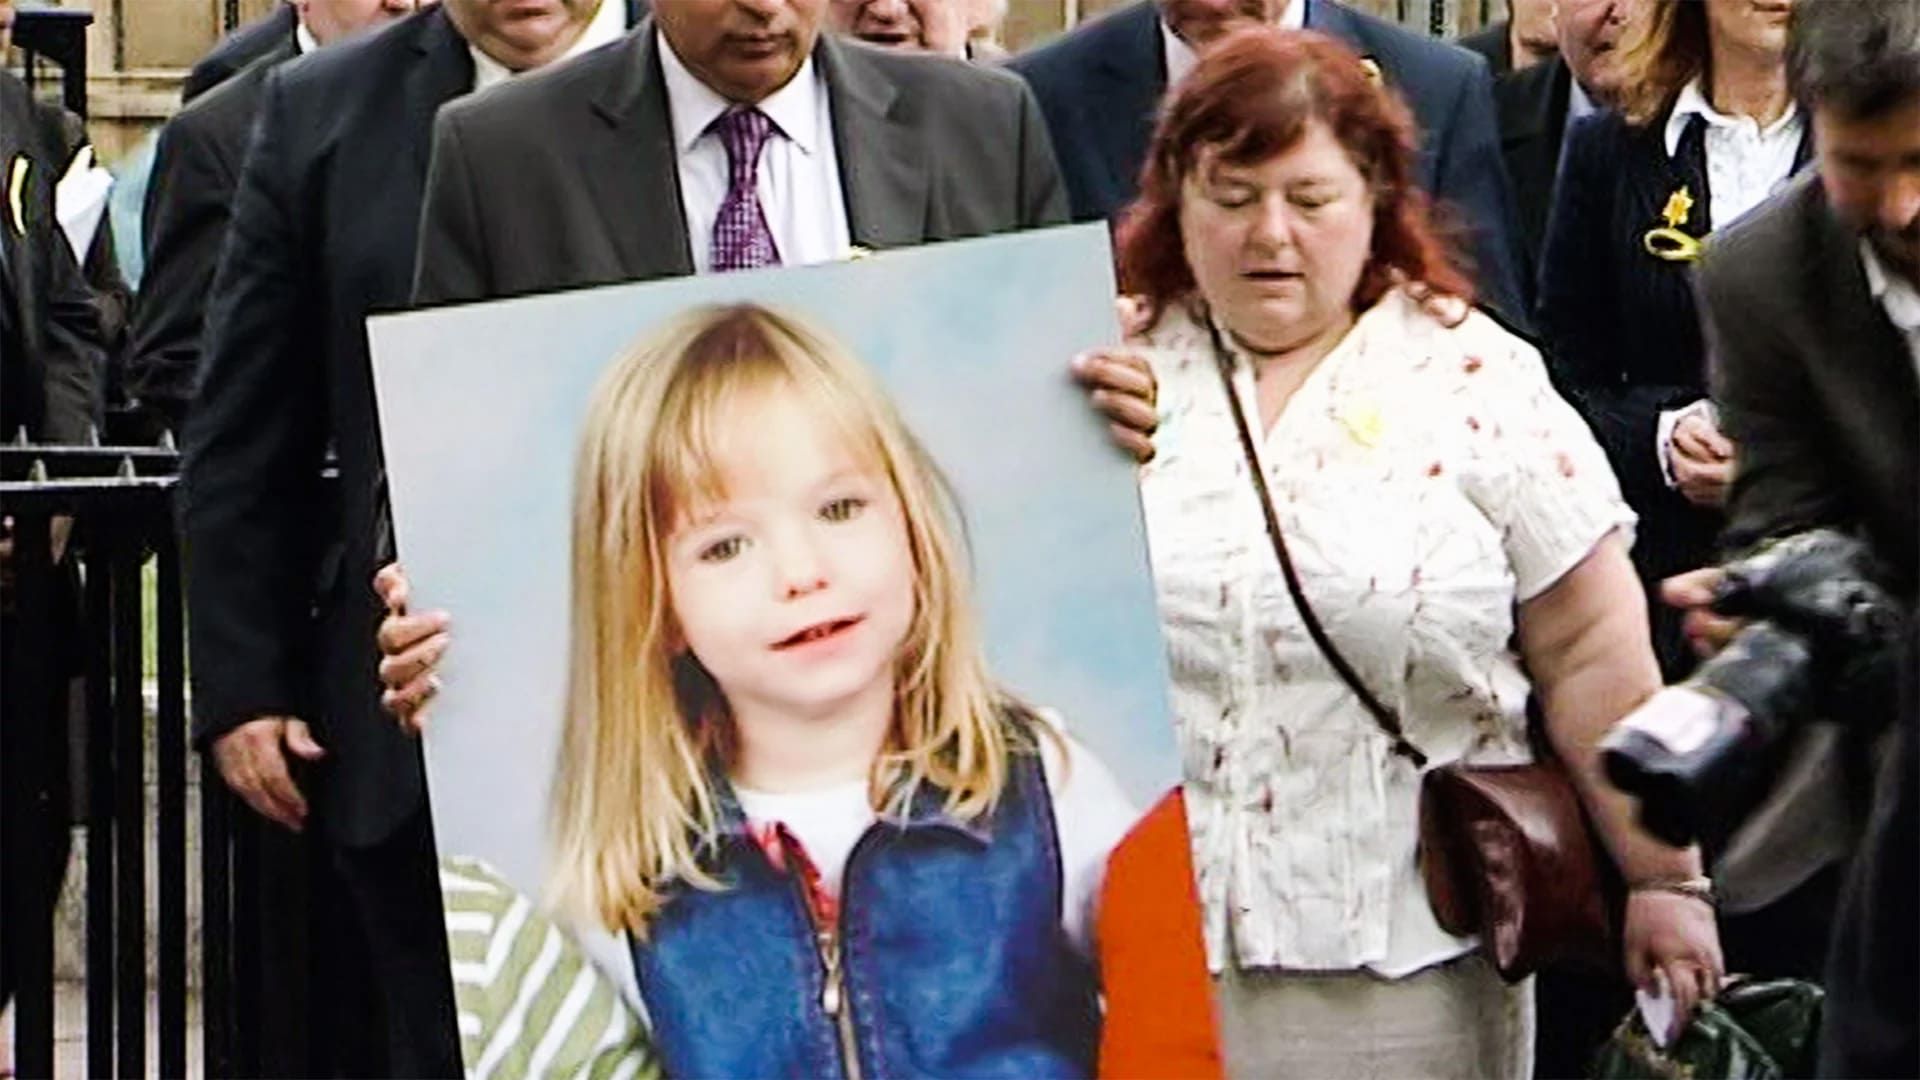 The Disappearance of Madeleine McCann background